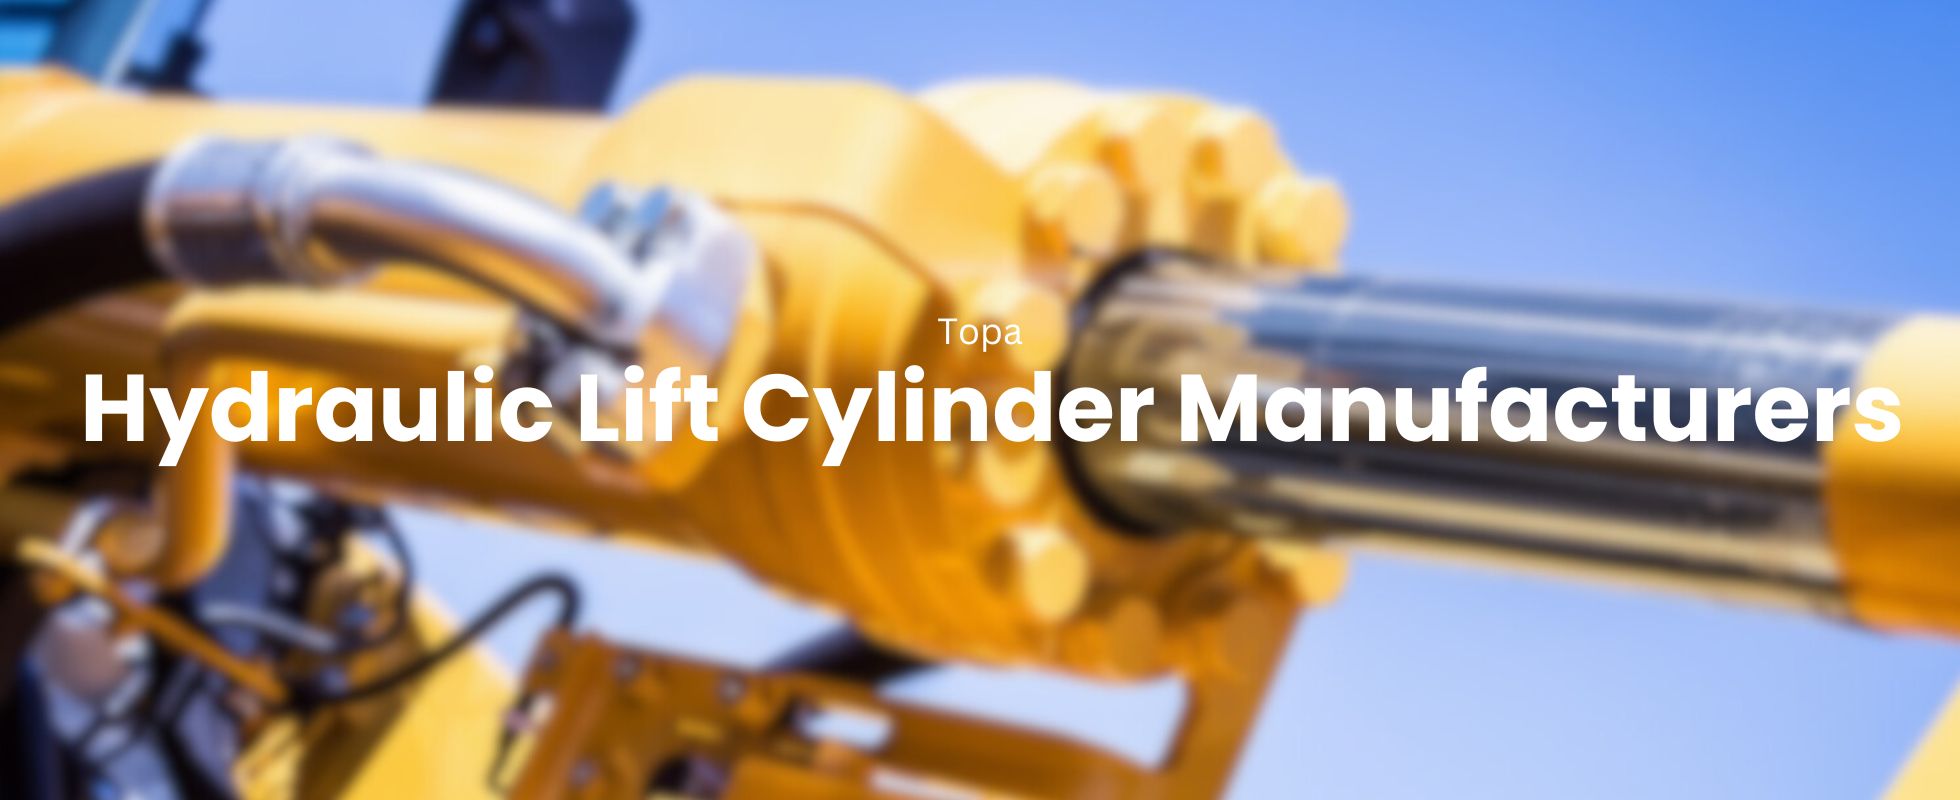 Topa Hydraulic Lift Cylinder Manufacturers Banner